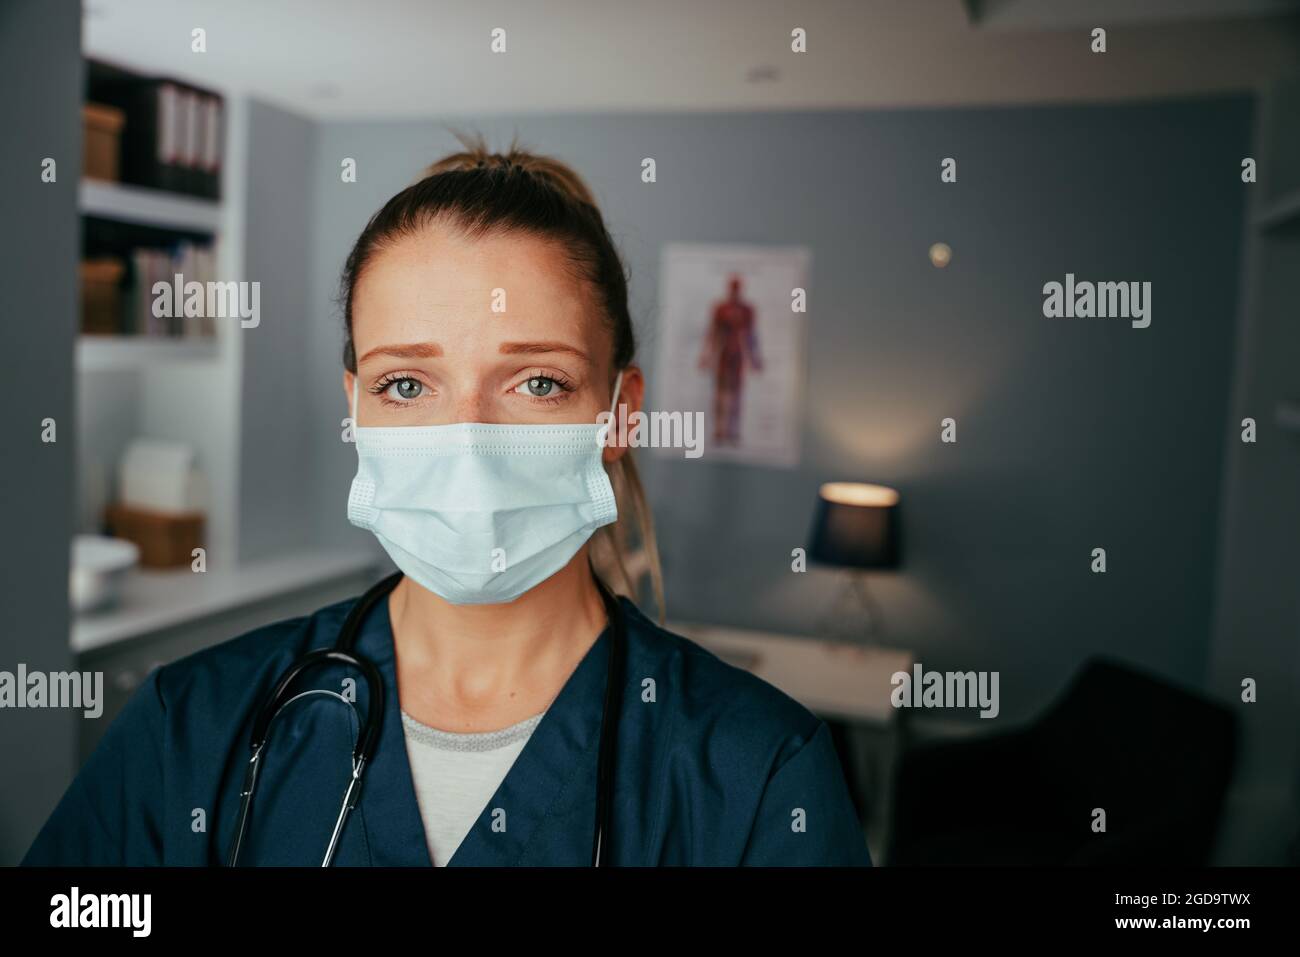 Caucasian female nurse standing in doctors office wearing surgical mask Stock Photo